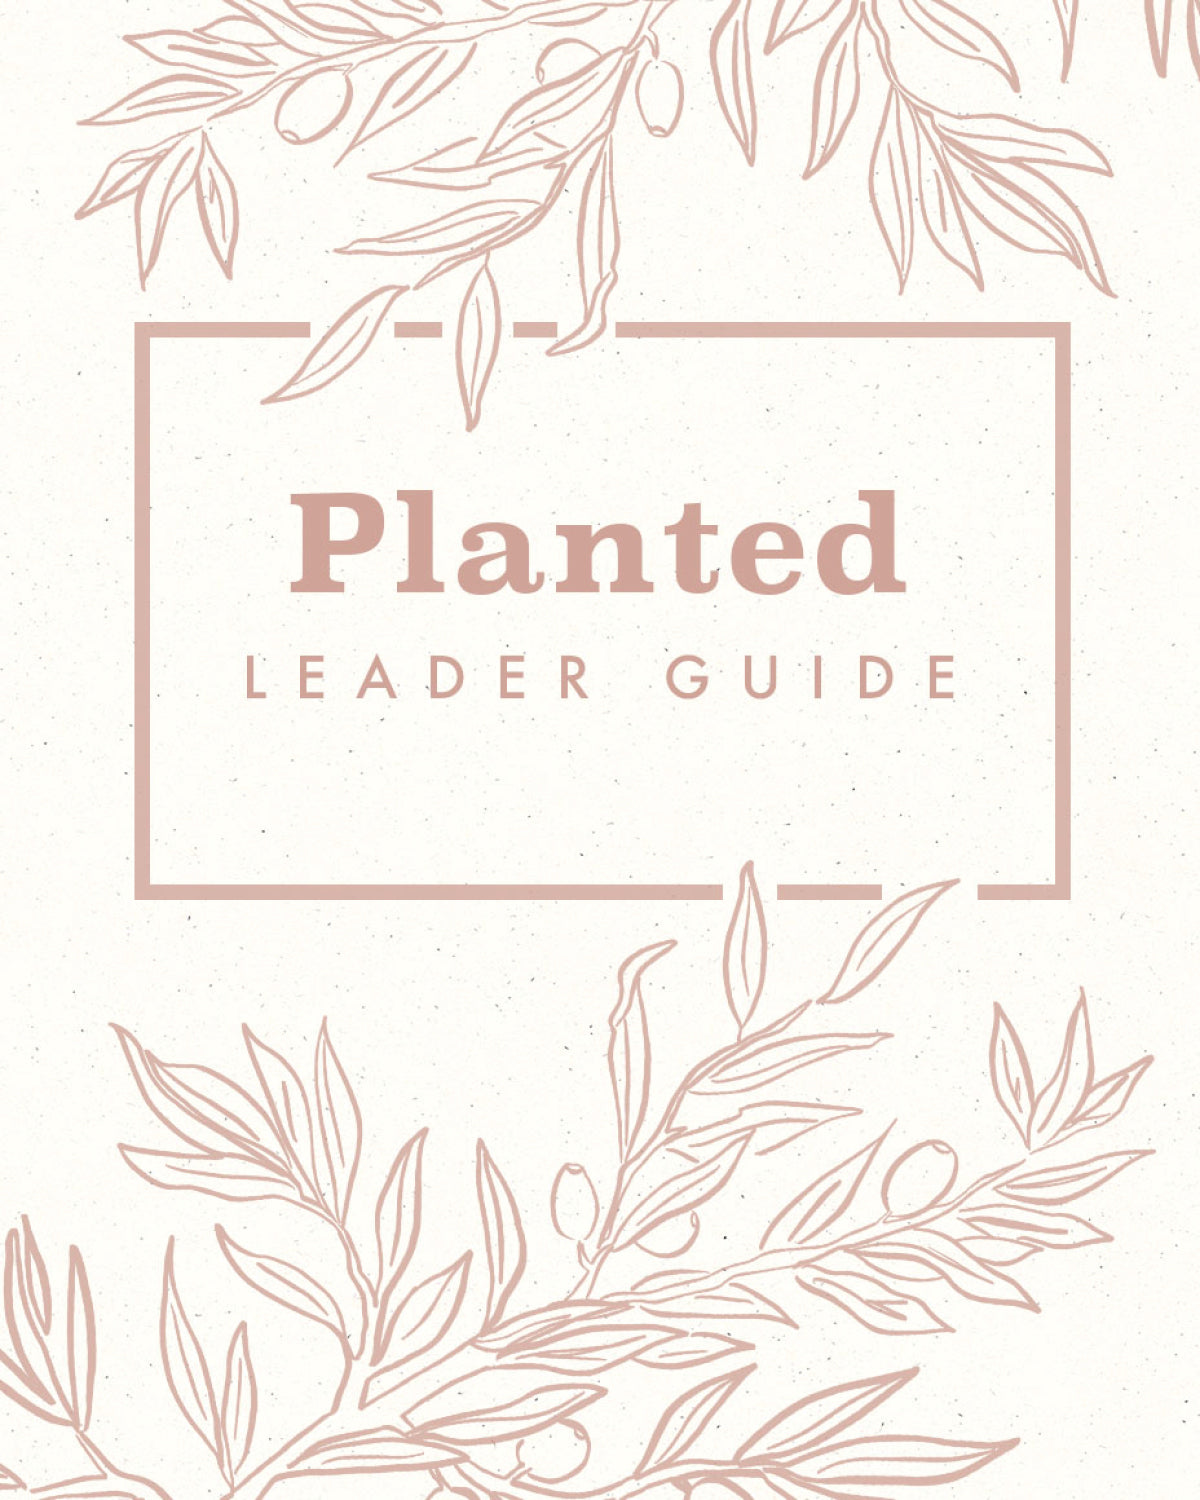 Planted Leader Guide [FREE PDF]